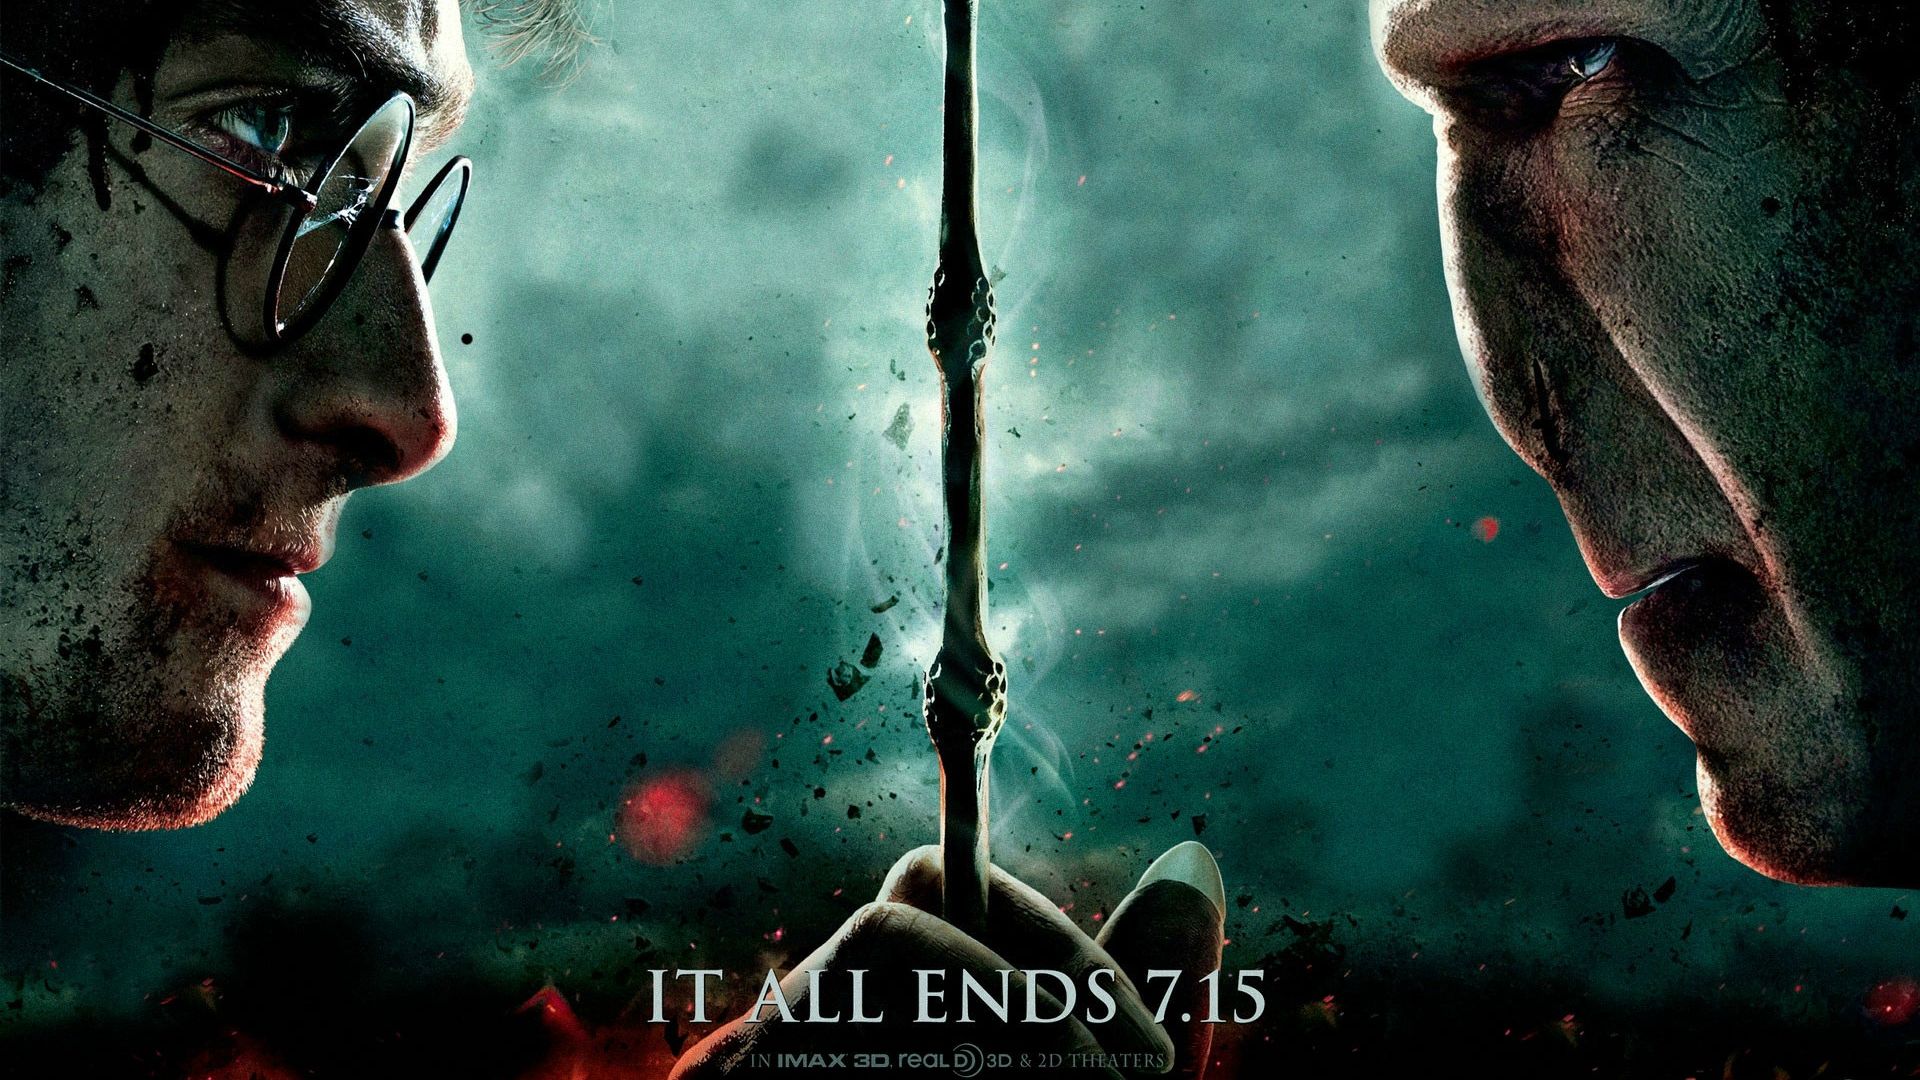 Movie Harry Potter and the Deathly Hallows: Part 2 HD Wallpaper | Background Image